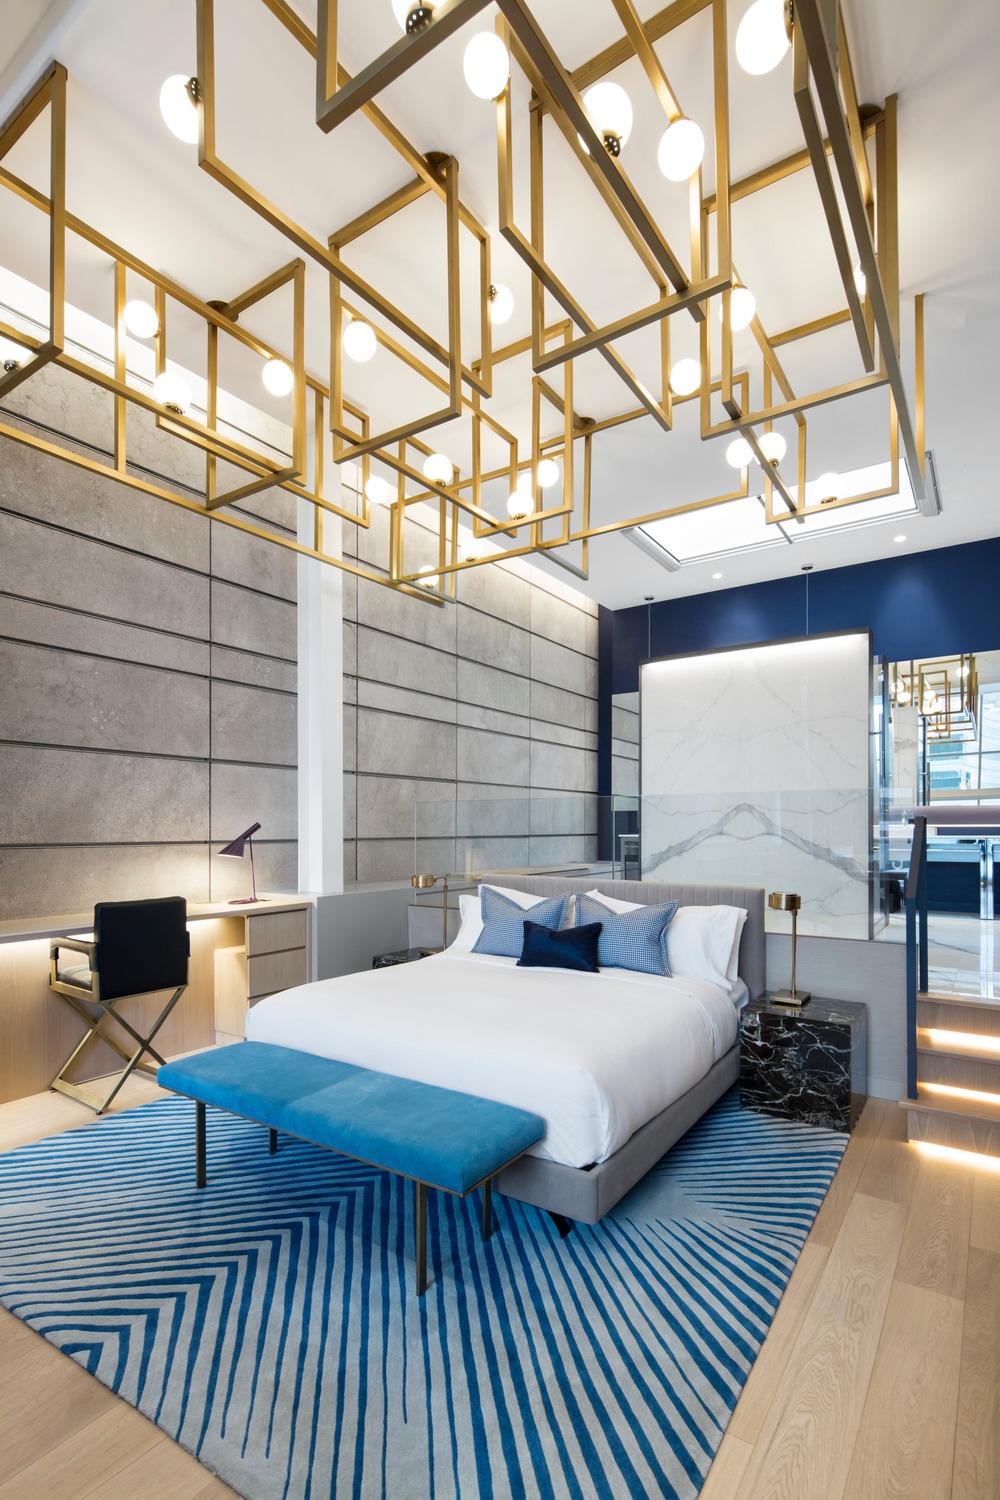 The bed in the W hotel